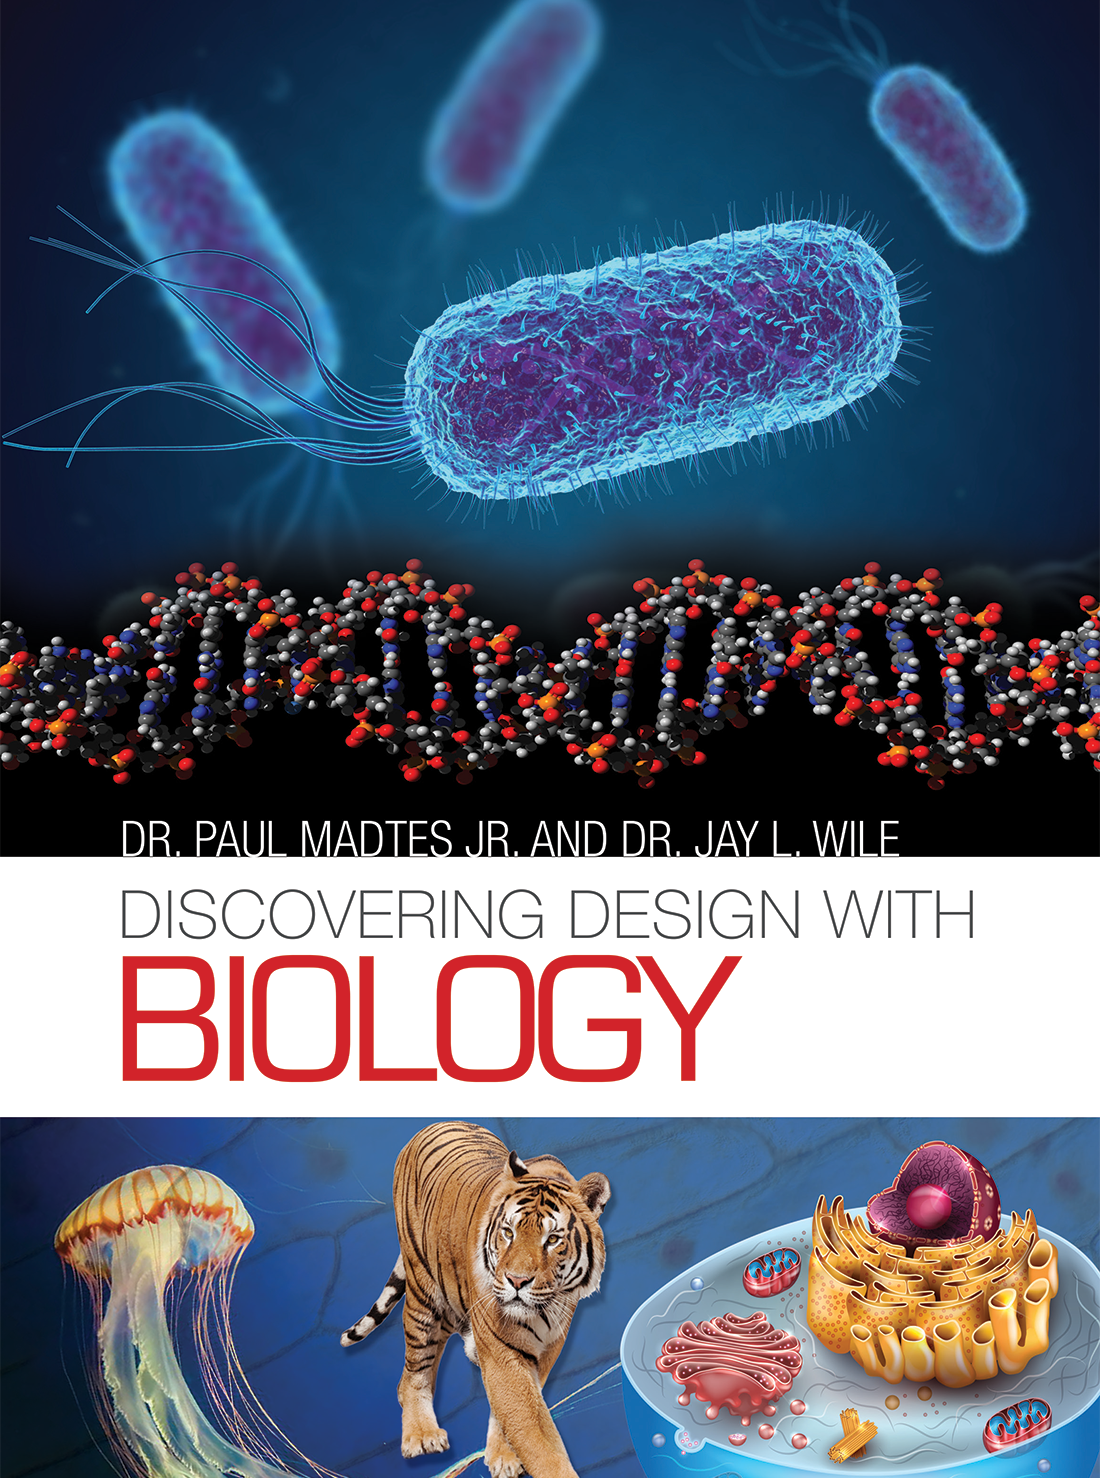 Biology textbook cover